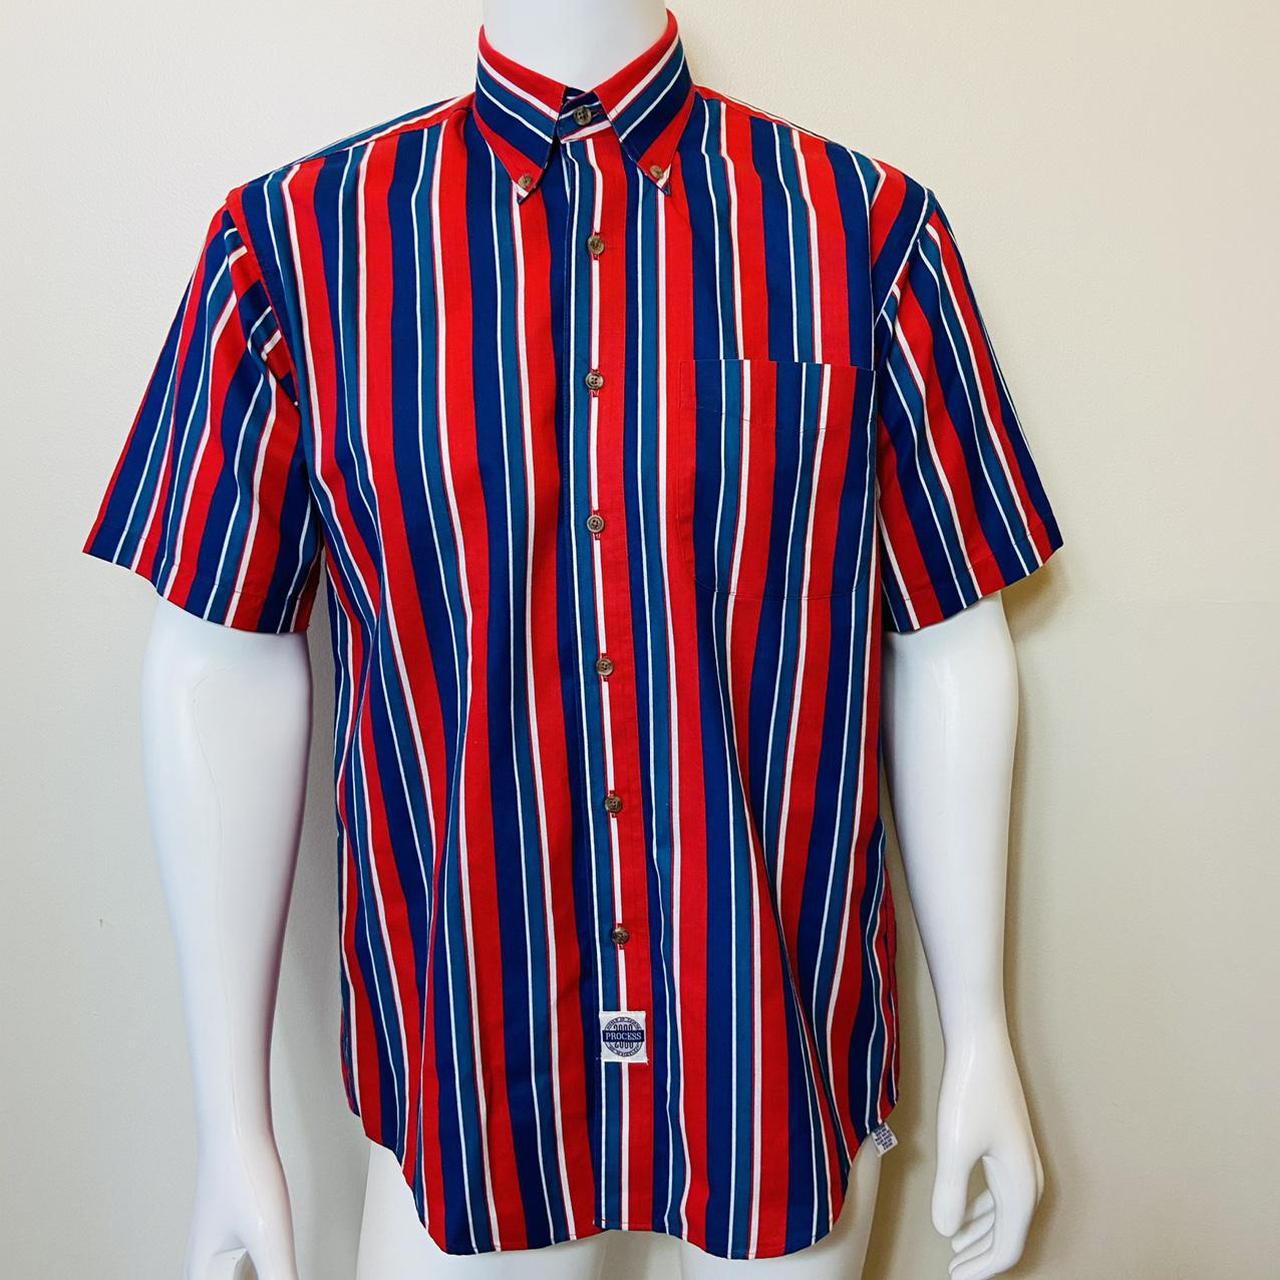 Product Image 1 - VINTAGE 1980s 1990s Striped Shirt